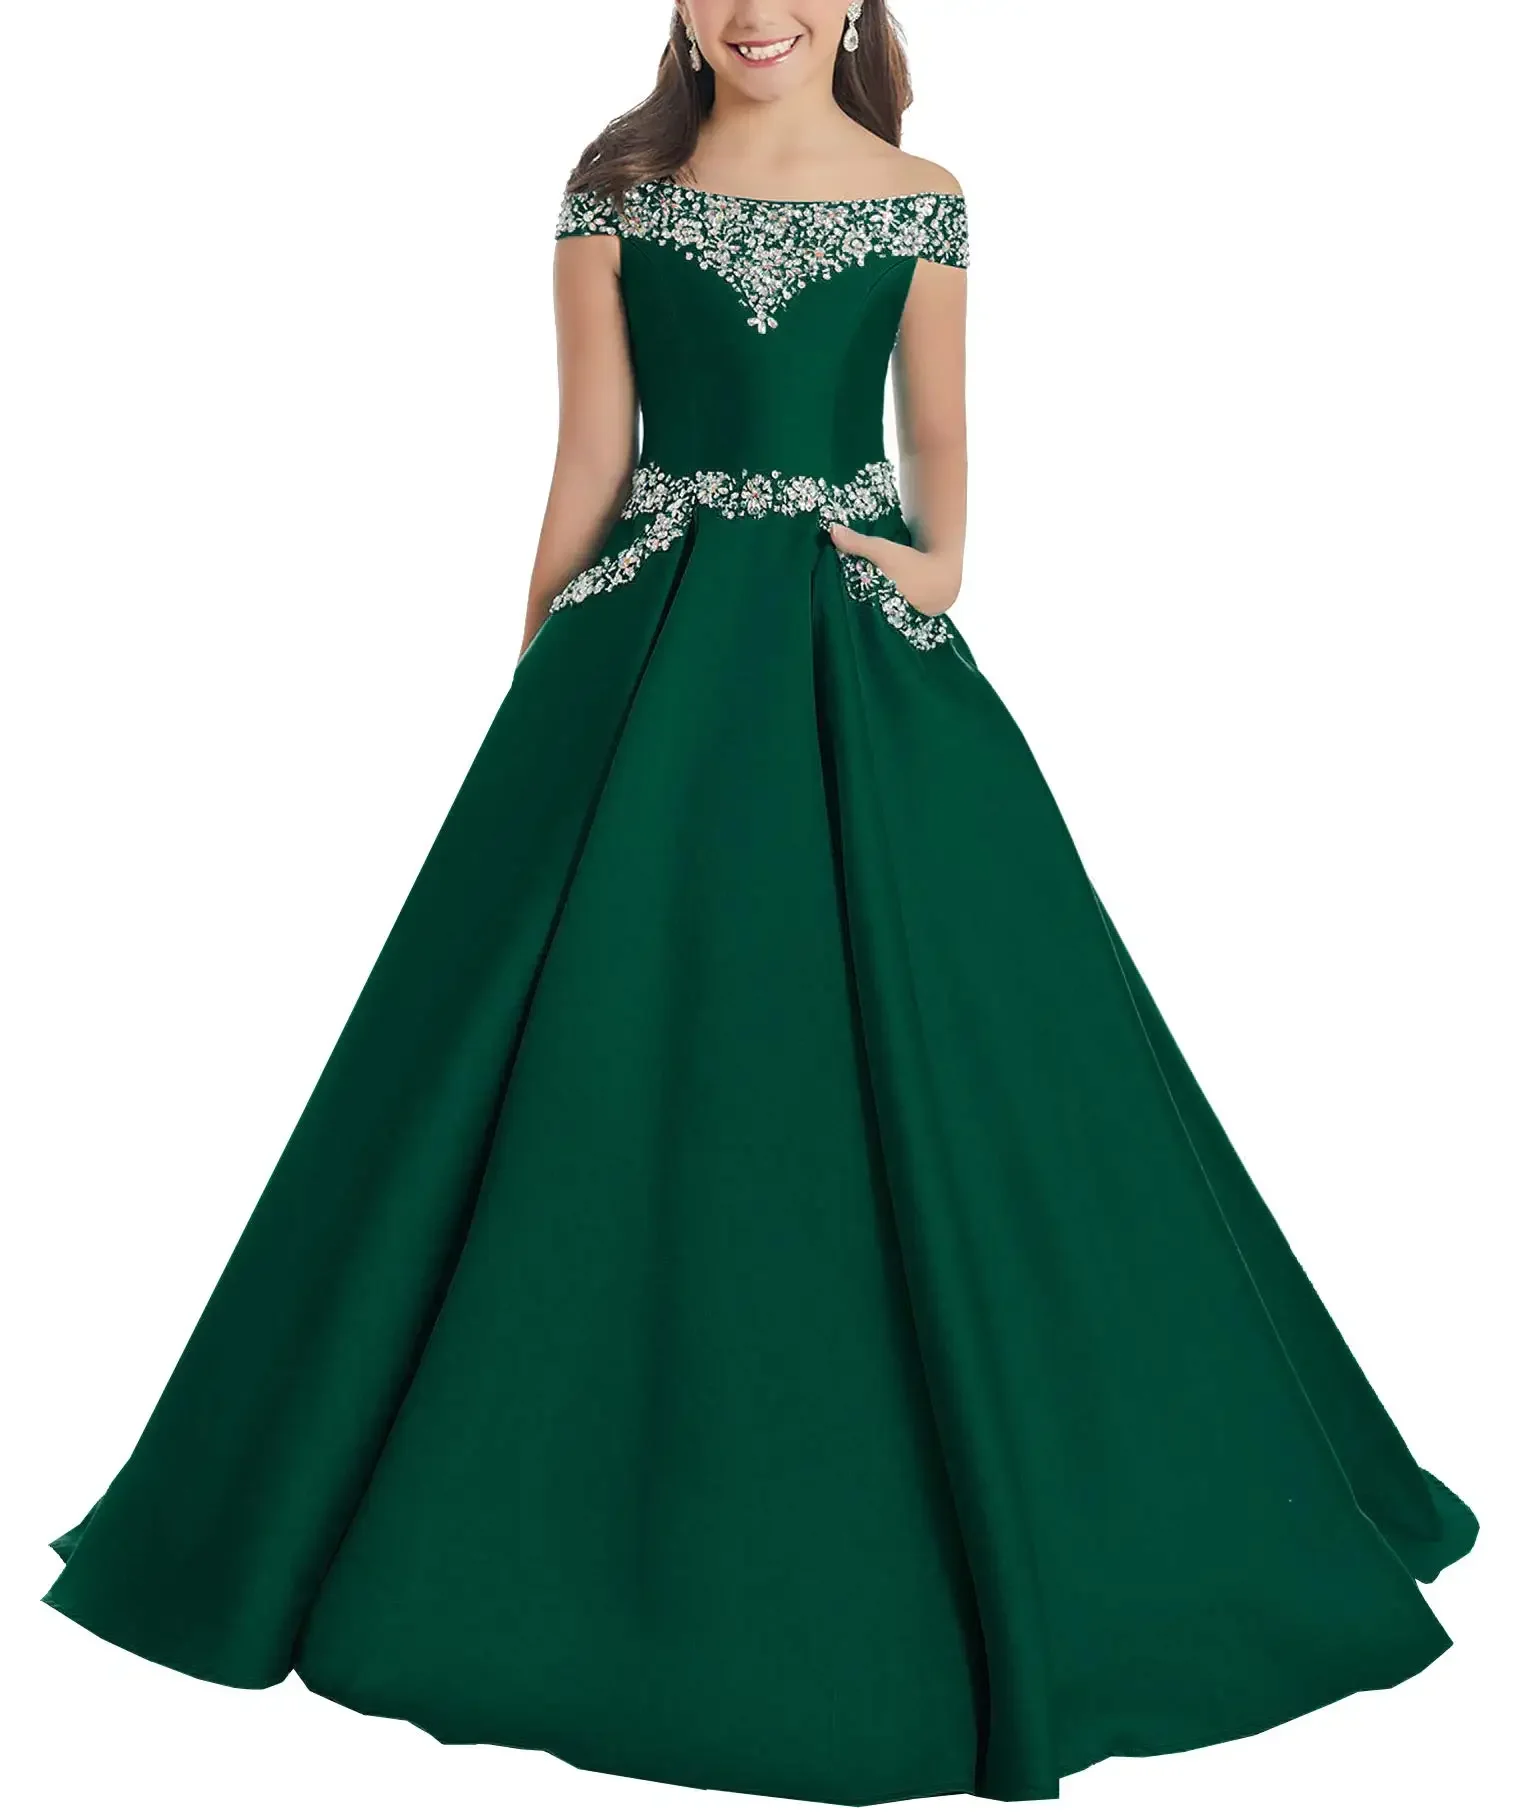 

Emerald Green Pageant Dresses Pockets Off Shoulder Flower Girl Dress For Wedding Toddlers Beaded Sequin Birthday Party Ball Gown